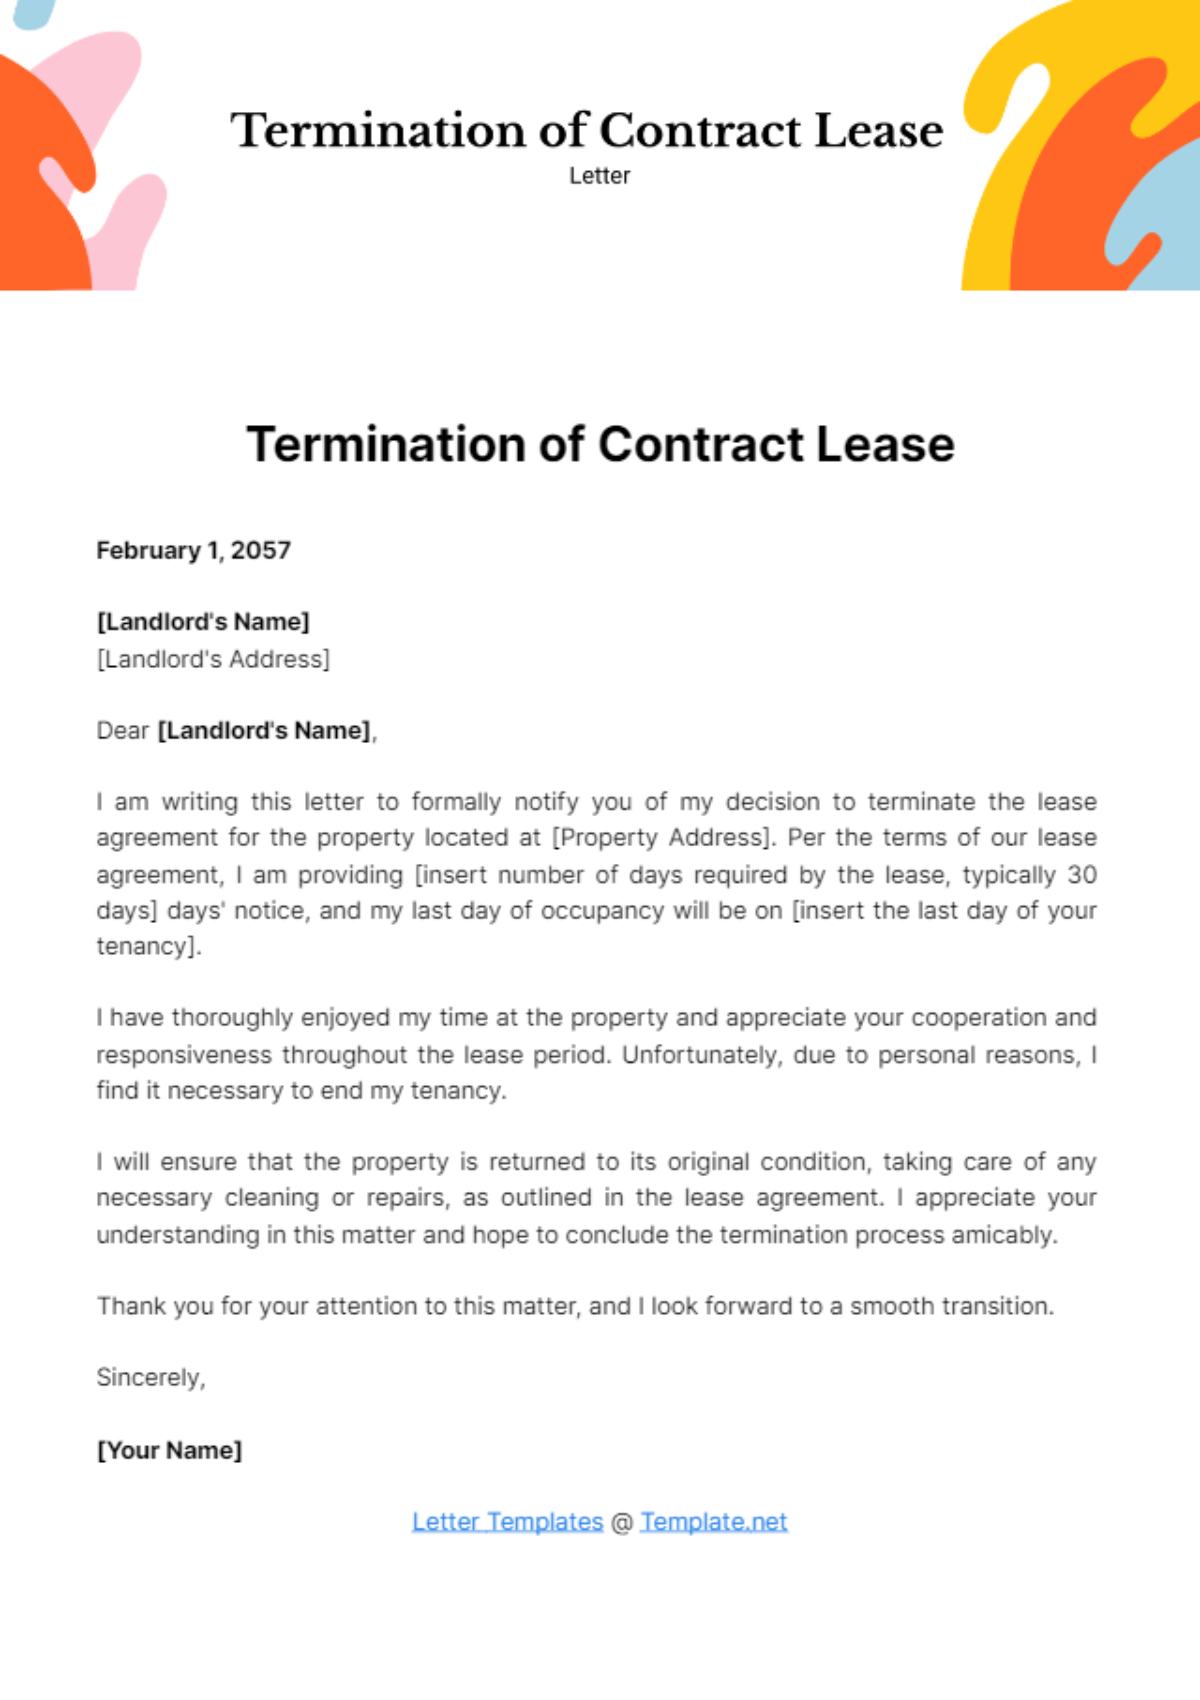 Free Termination of Contract Lease Letter Template